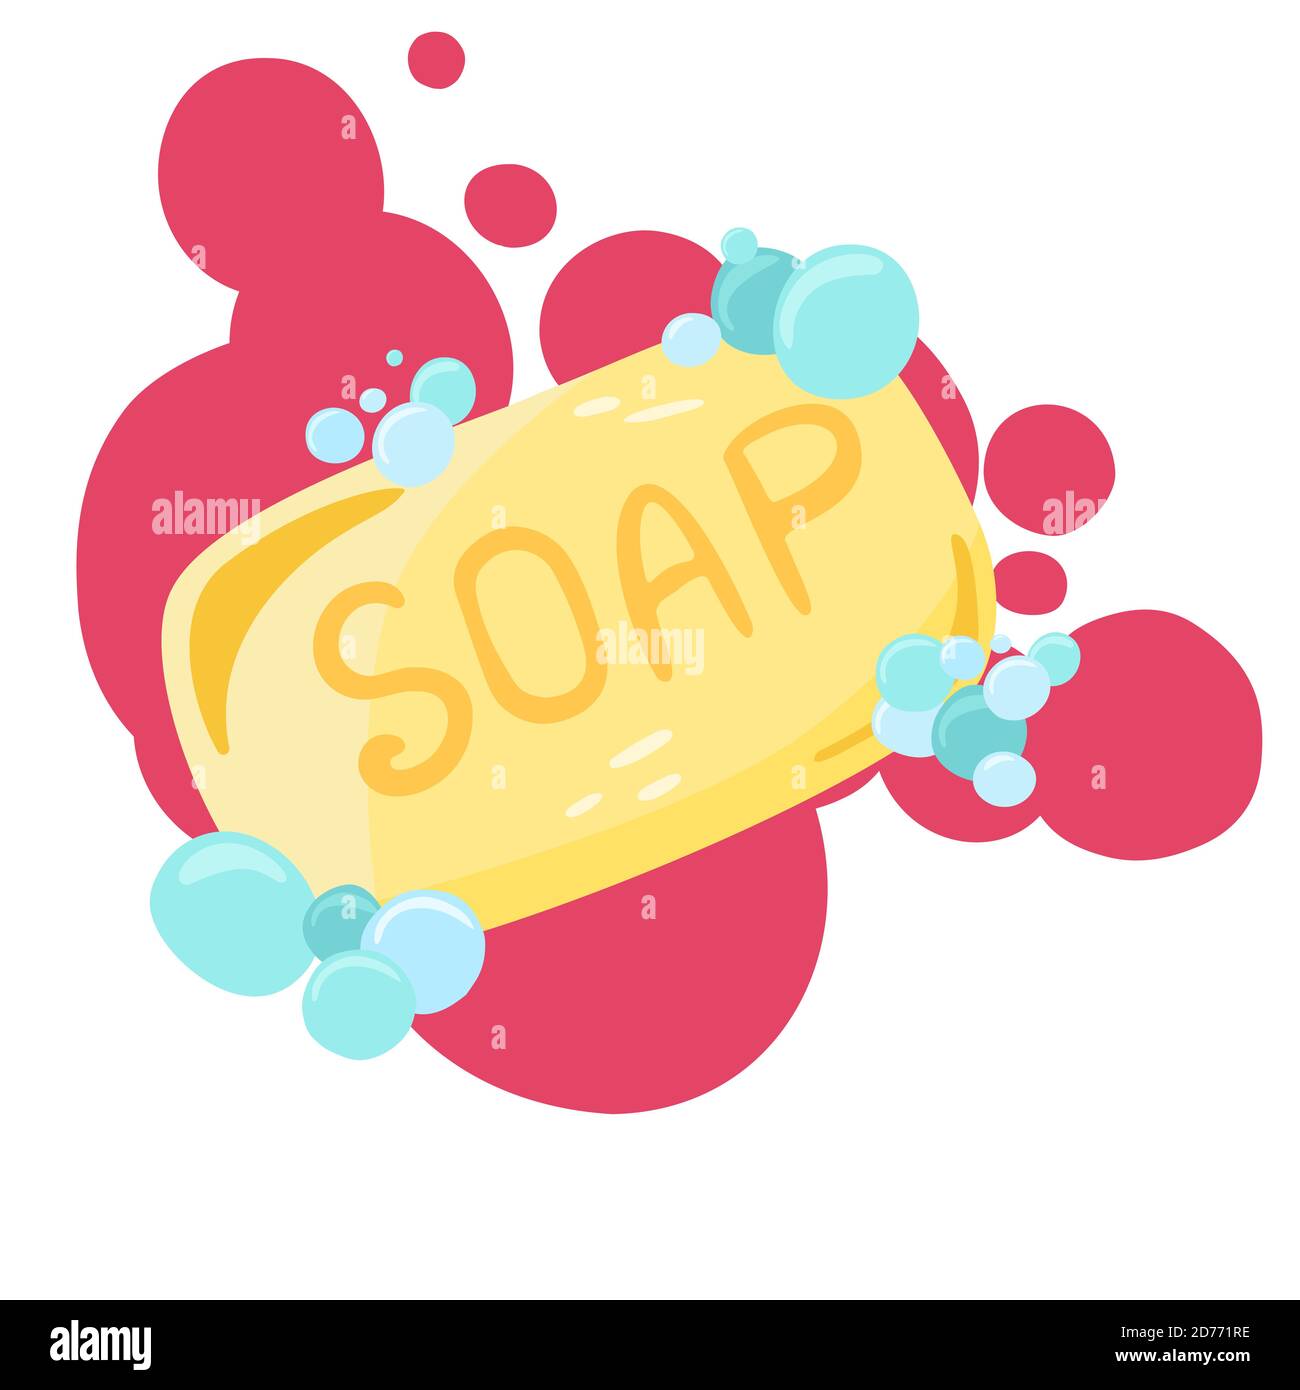 Cleaning equipment. Cleaning service concept with various cleaning tools. Flat vector doodle illustration Stock Vector